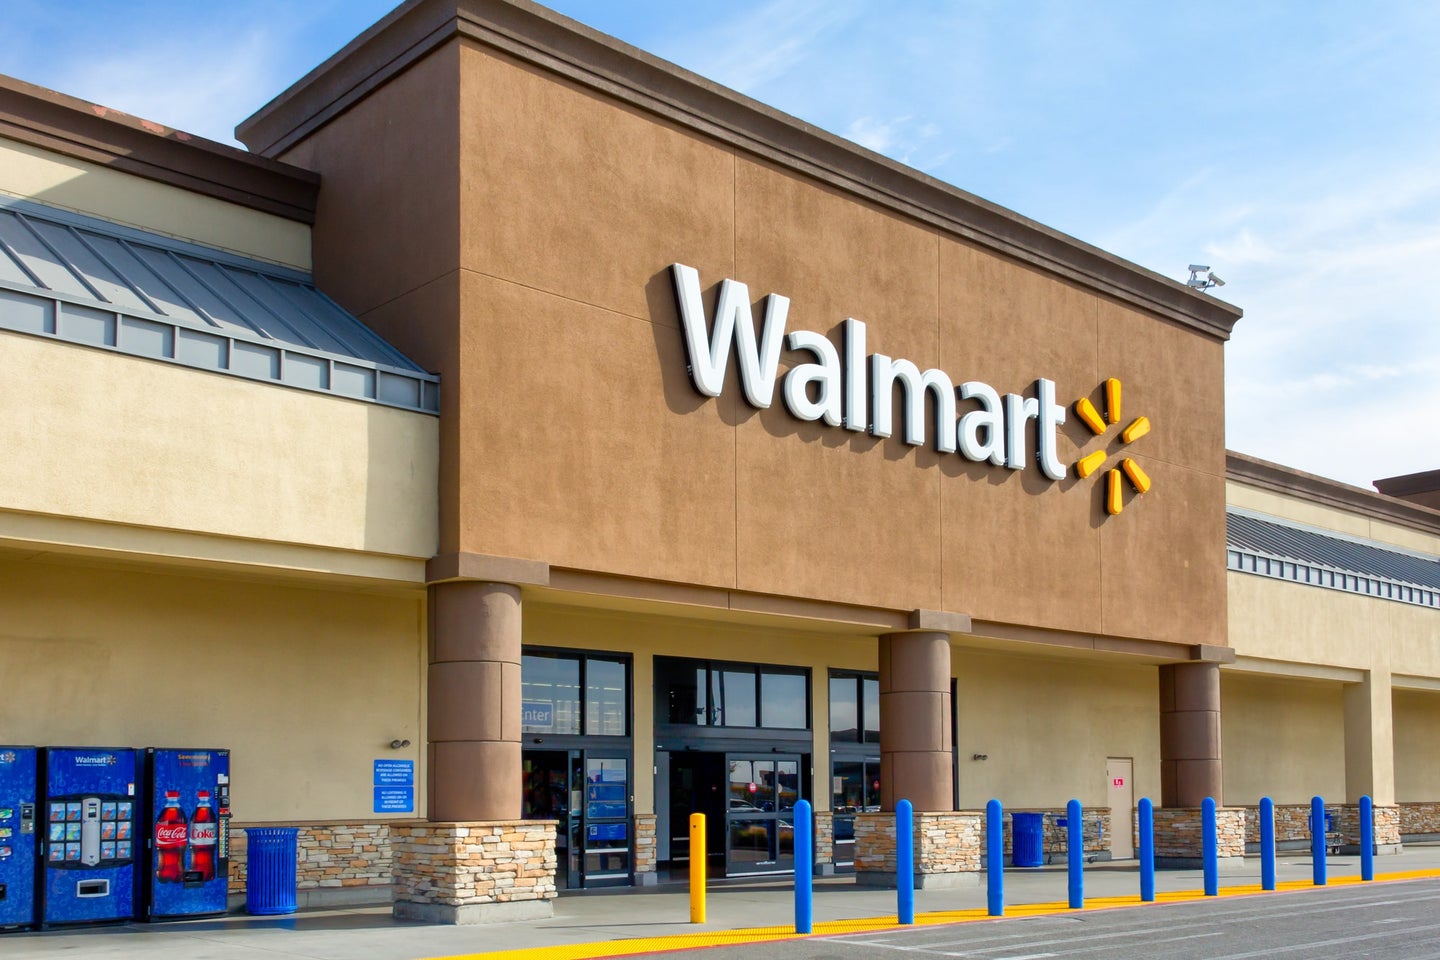 Shop Black Friday 2020 Deals Throughout November at Walmart’s Early Black Friday Sale